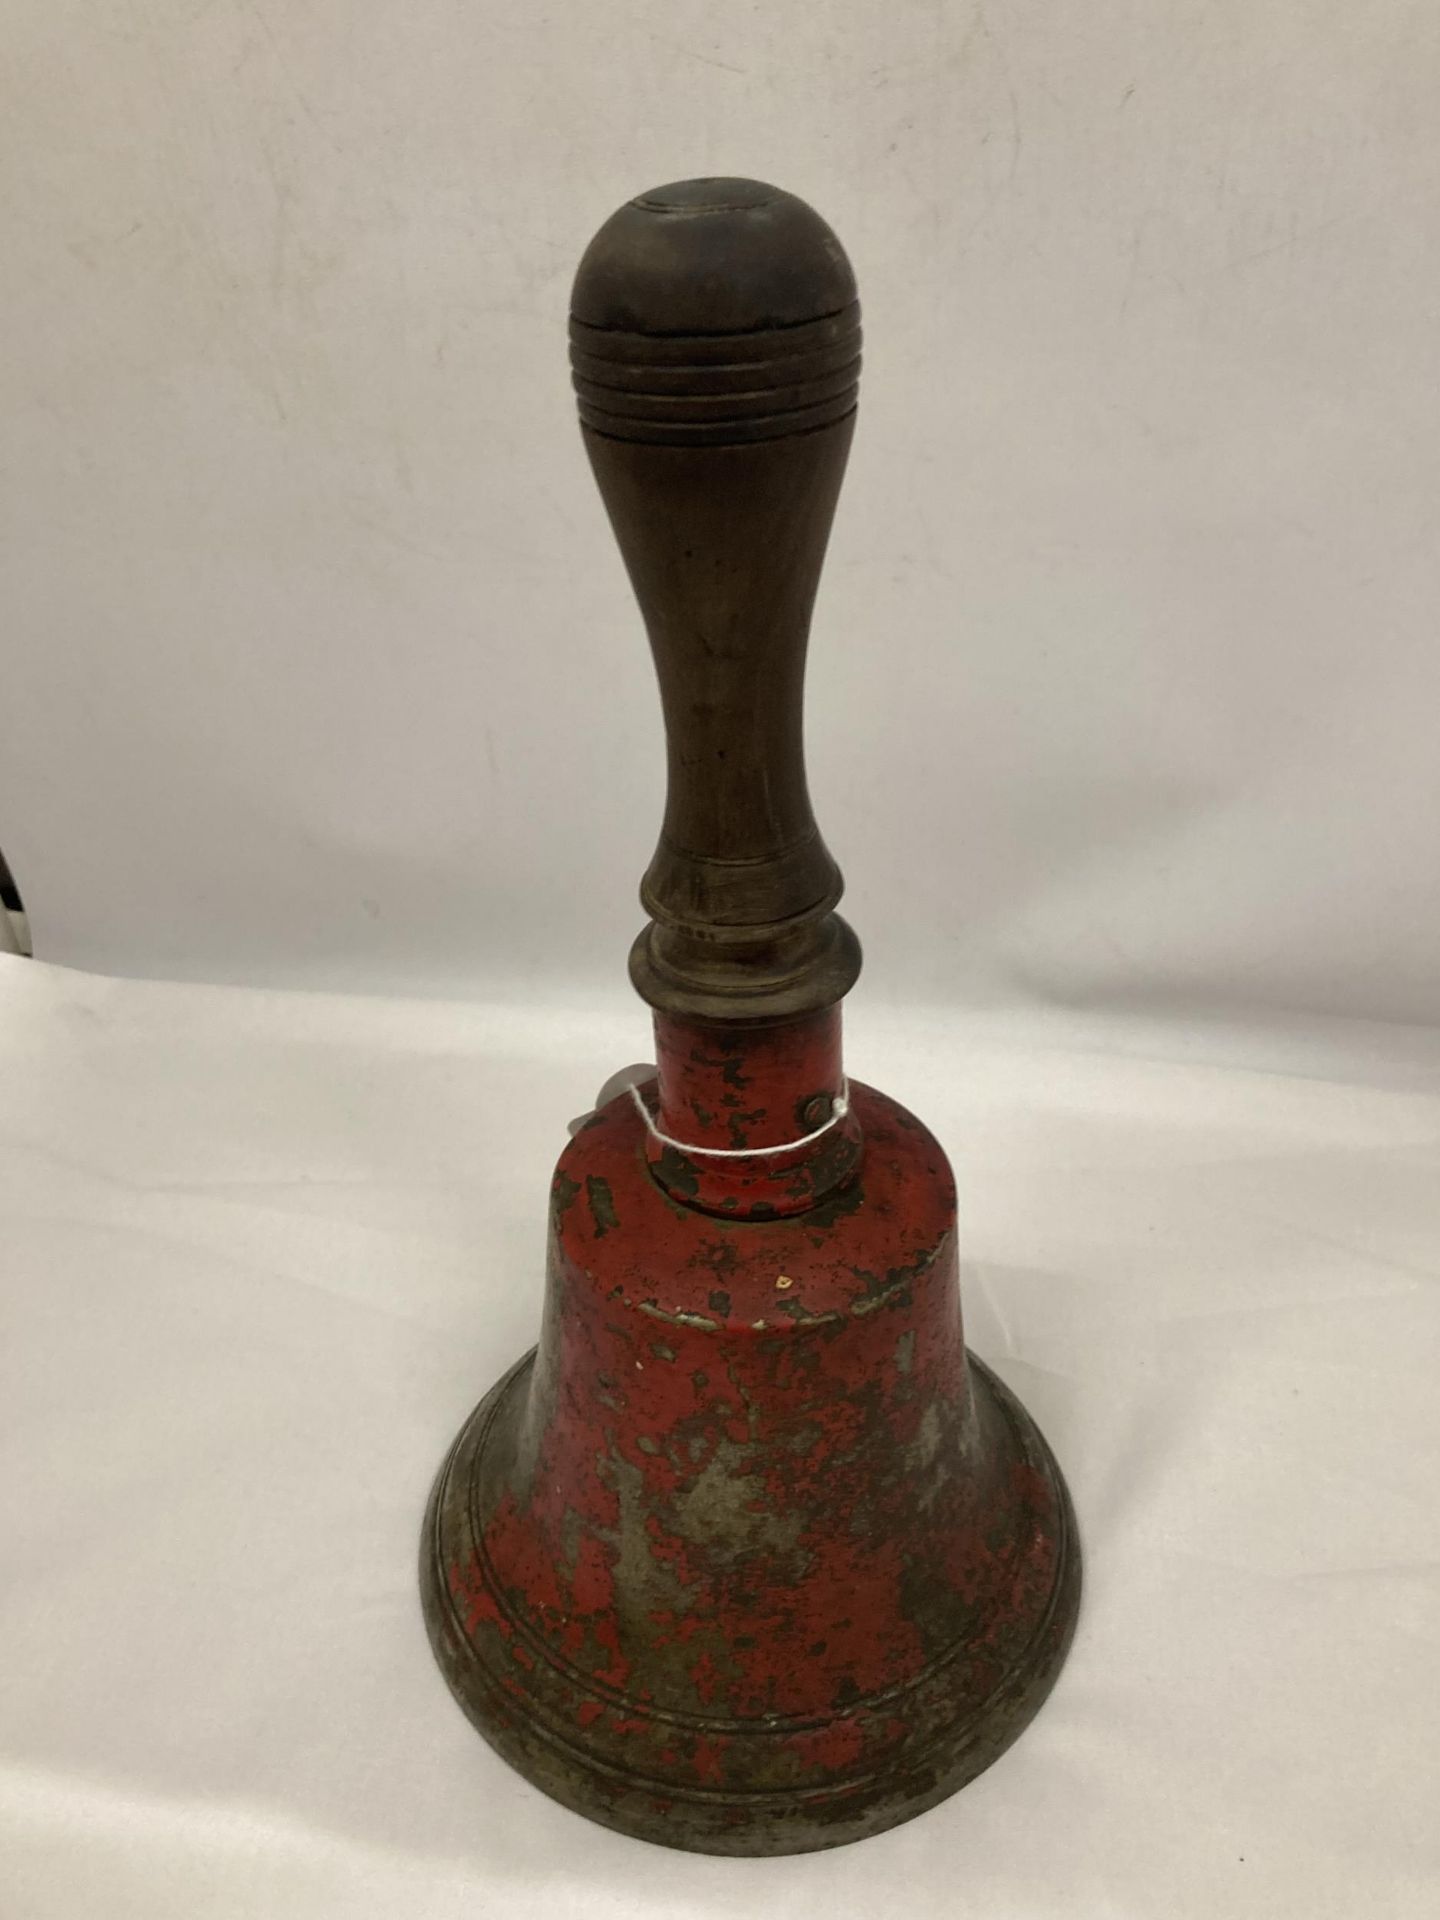 A LARGE VINTAGE METAL BELL WITH A WOODEN HANDLE - Bild 2 aus 3